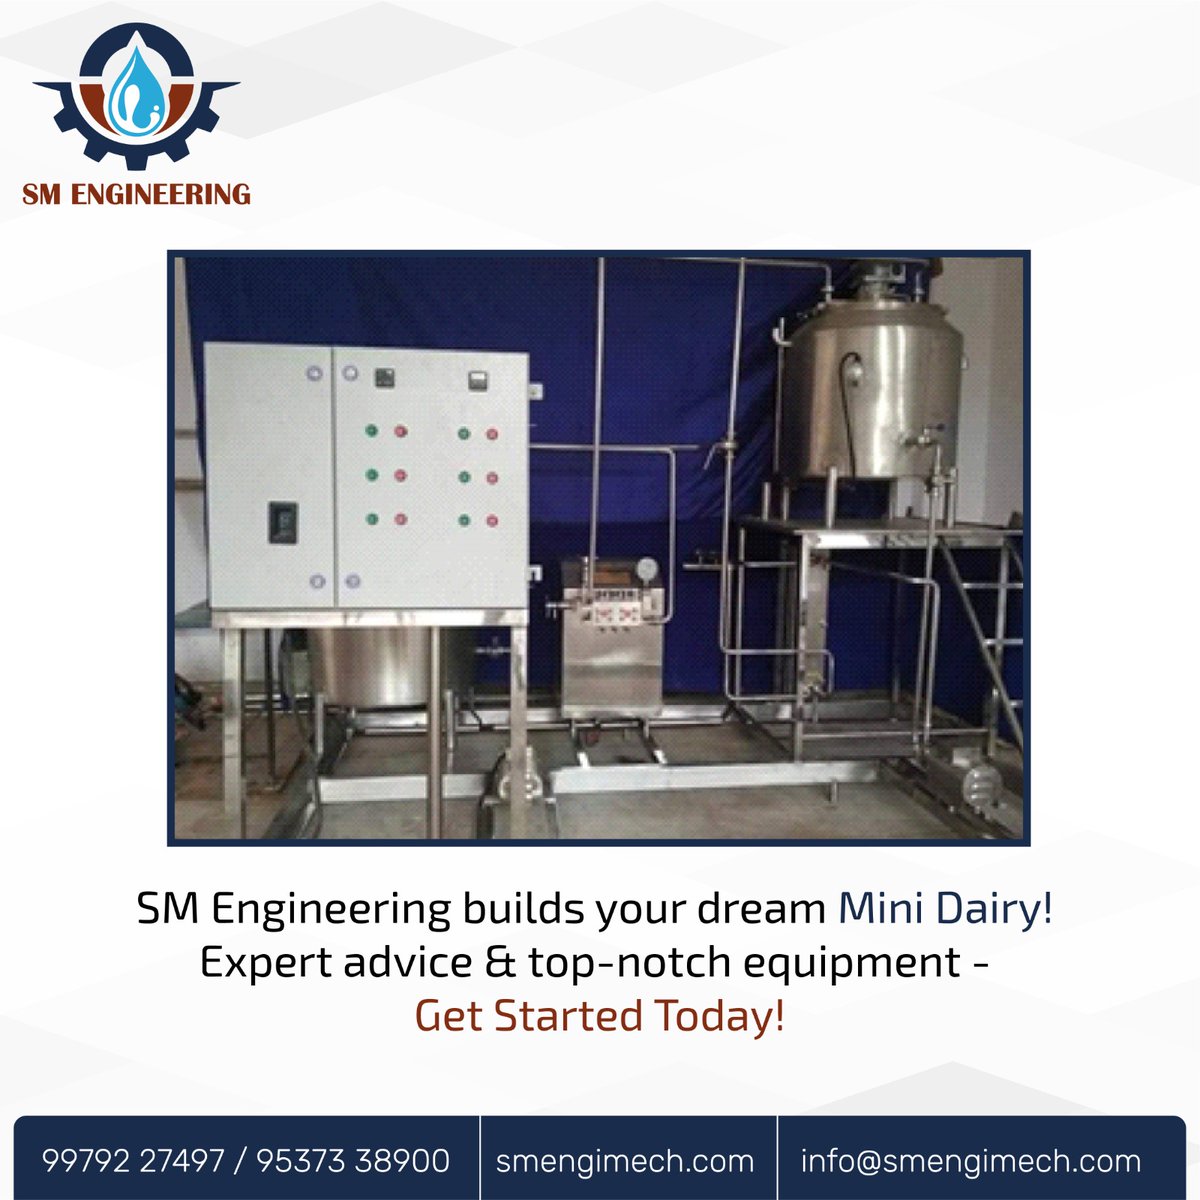 Introducing our mini dairy machine: big dreams in a compact package! 📷📷 Perfect for small-scale dairy processing, turning fresh milk into delicious products like yogurt, cheese, butter, and more
📷 smengimech.com/cheese-process…
📷 +91 9979227497
#smengineering #cheesemaking